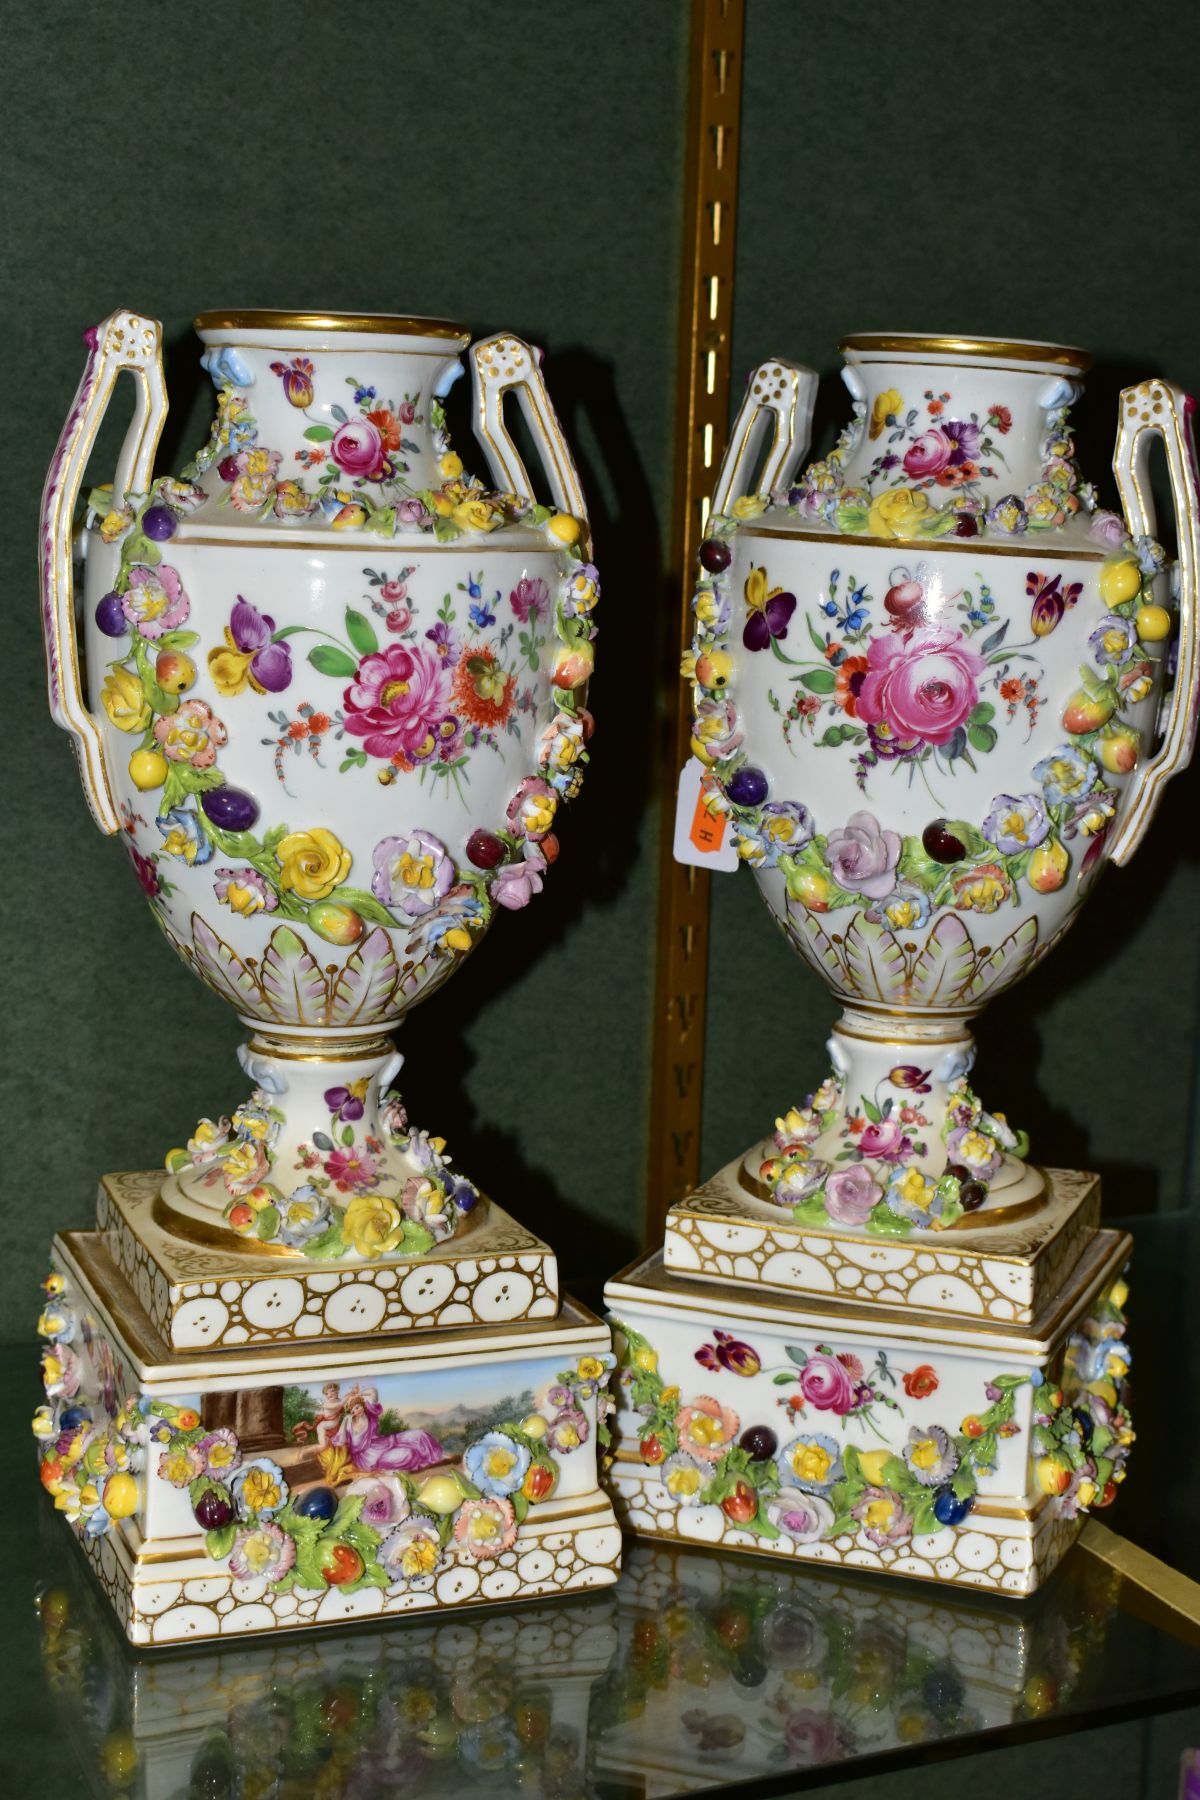 A PAIR OF EARLY 20TH CENTURY POTSCHAPPEL PORCELAIN TWIN HANDLED FLORAL ENCRUSTED VASES ON PLINTHS, - Image 7 of 20